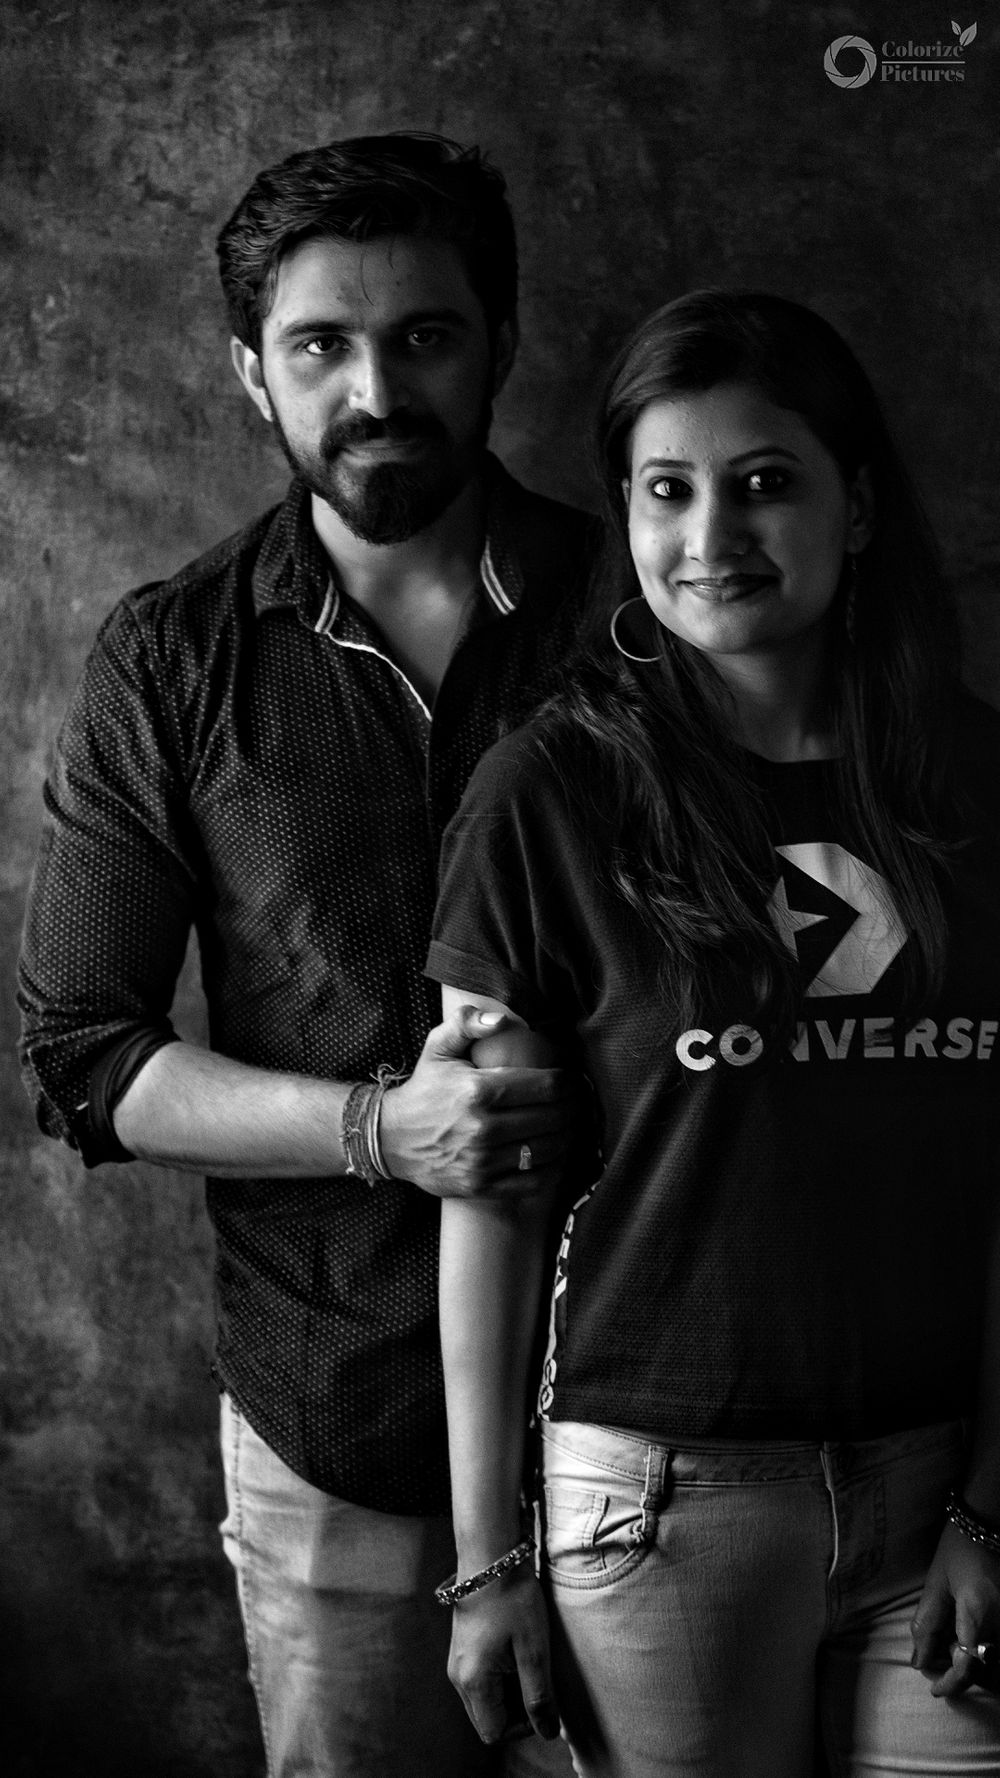 Photo From Couple photoshoot for Rahul & Manisha - By Colorize Pictures